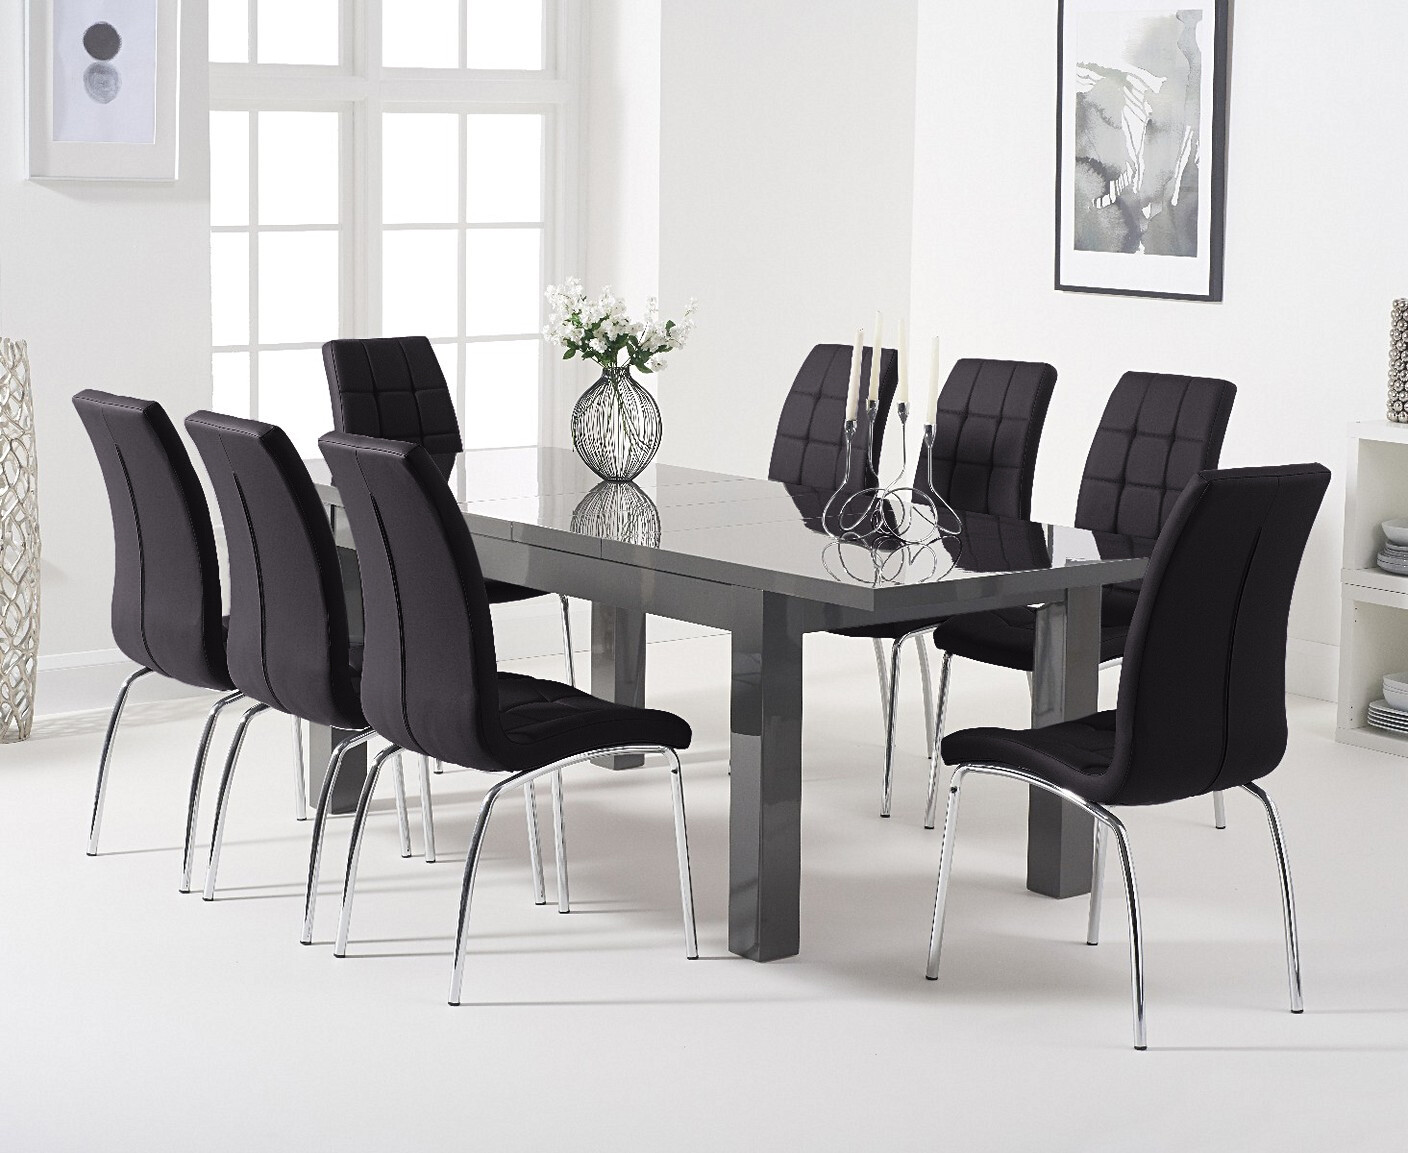 Extending Seattle 160cm Dark Grey High Gloss Dining Table With 8 White Enzo Chairs